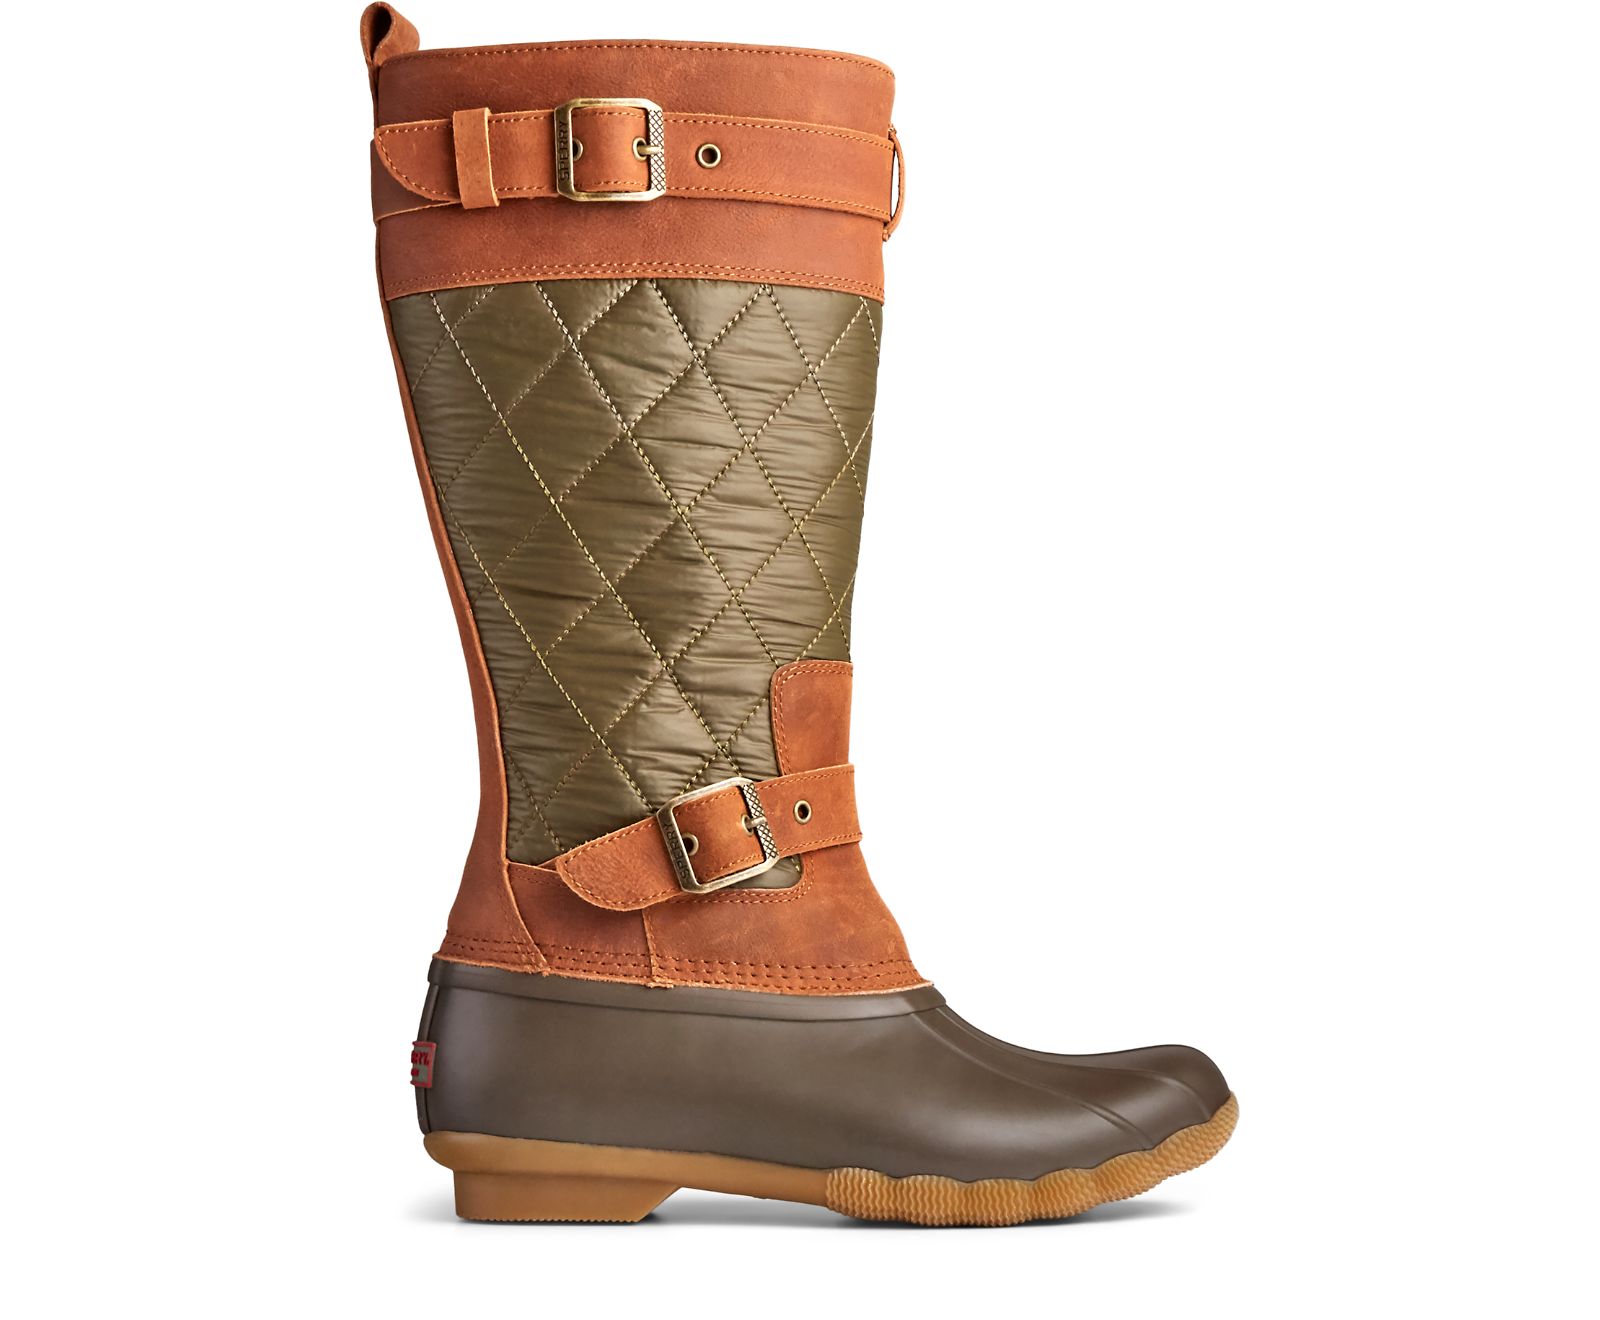 Women's Saltwater Tall Nylon Duck Boot - Olive/Brown